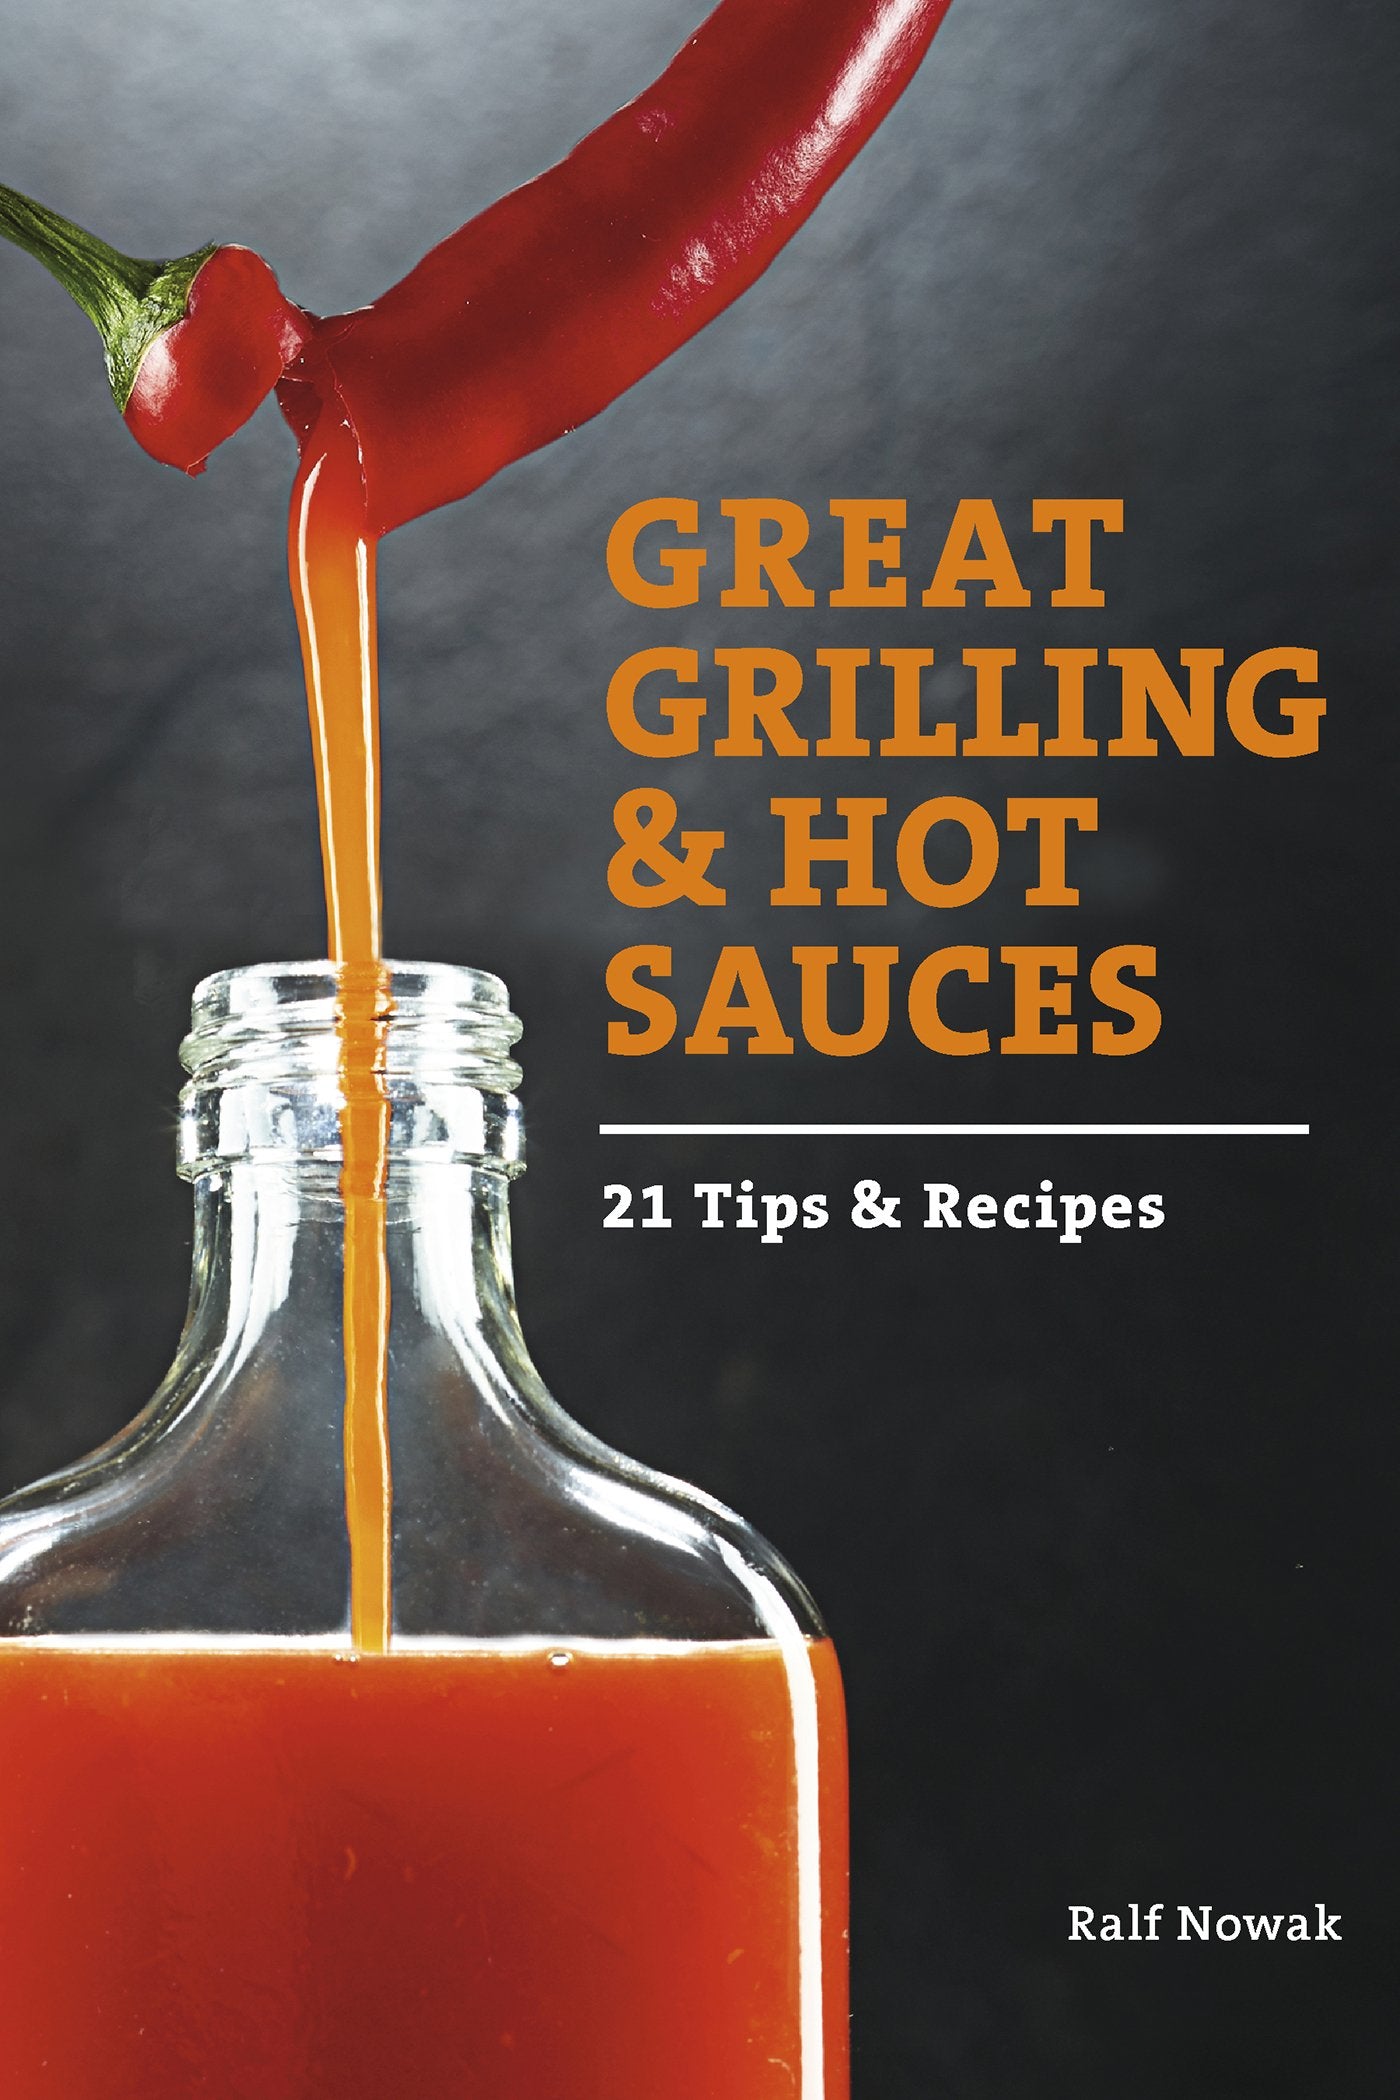 Great Grilling and Hot Sauces: Recipes and Tips (Ralf Nowak)